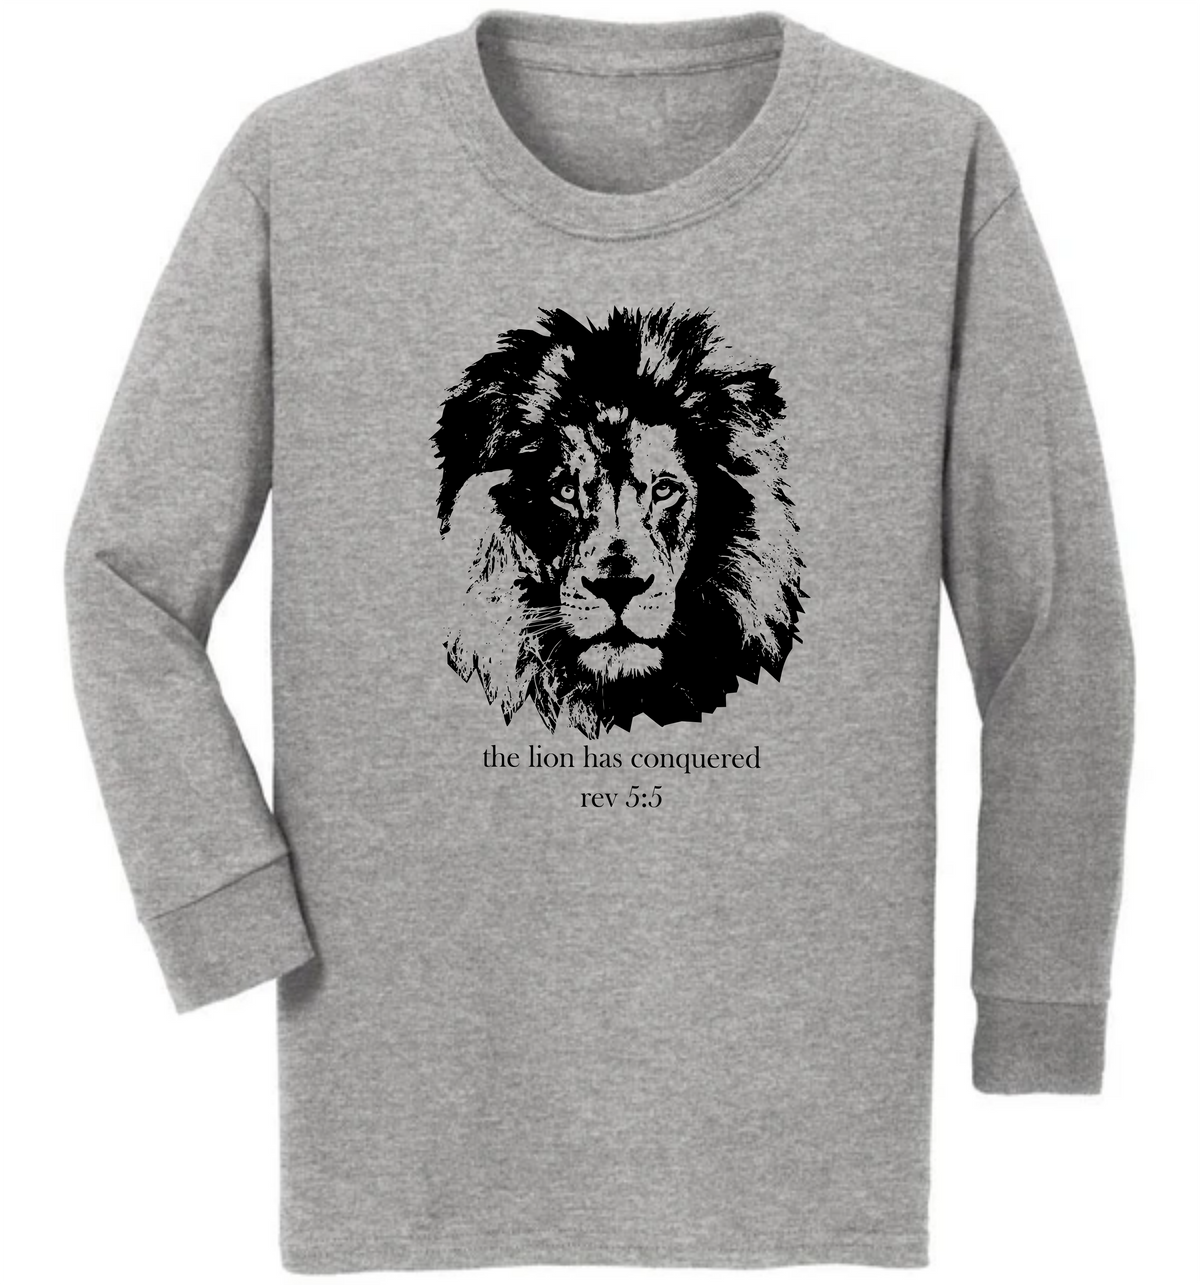 The Lion Has Conquered Long Sleeve